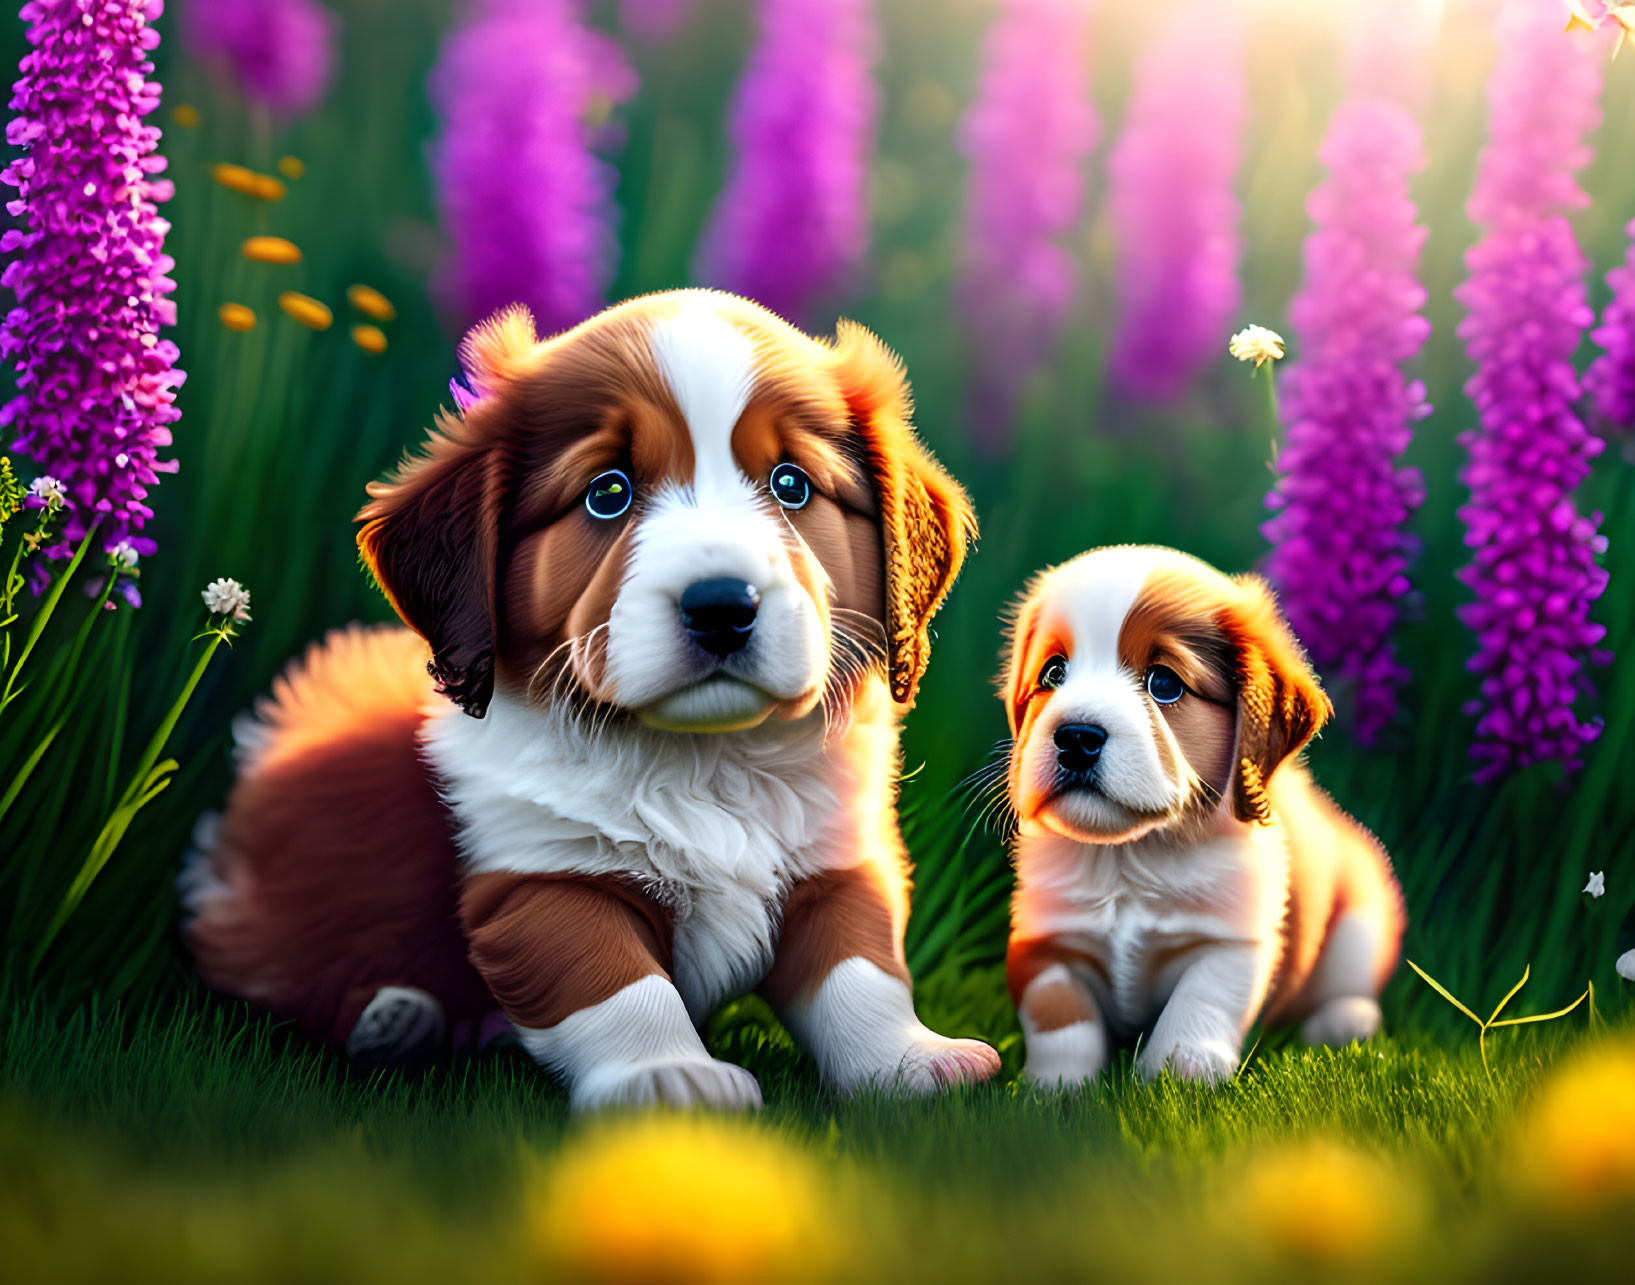 Adorable puppies playing in colorful flower garden with sunlight filtering through